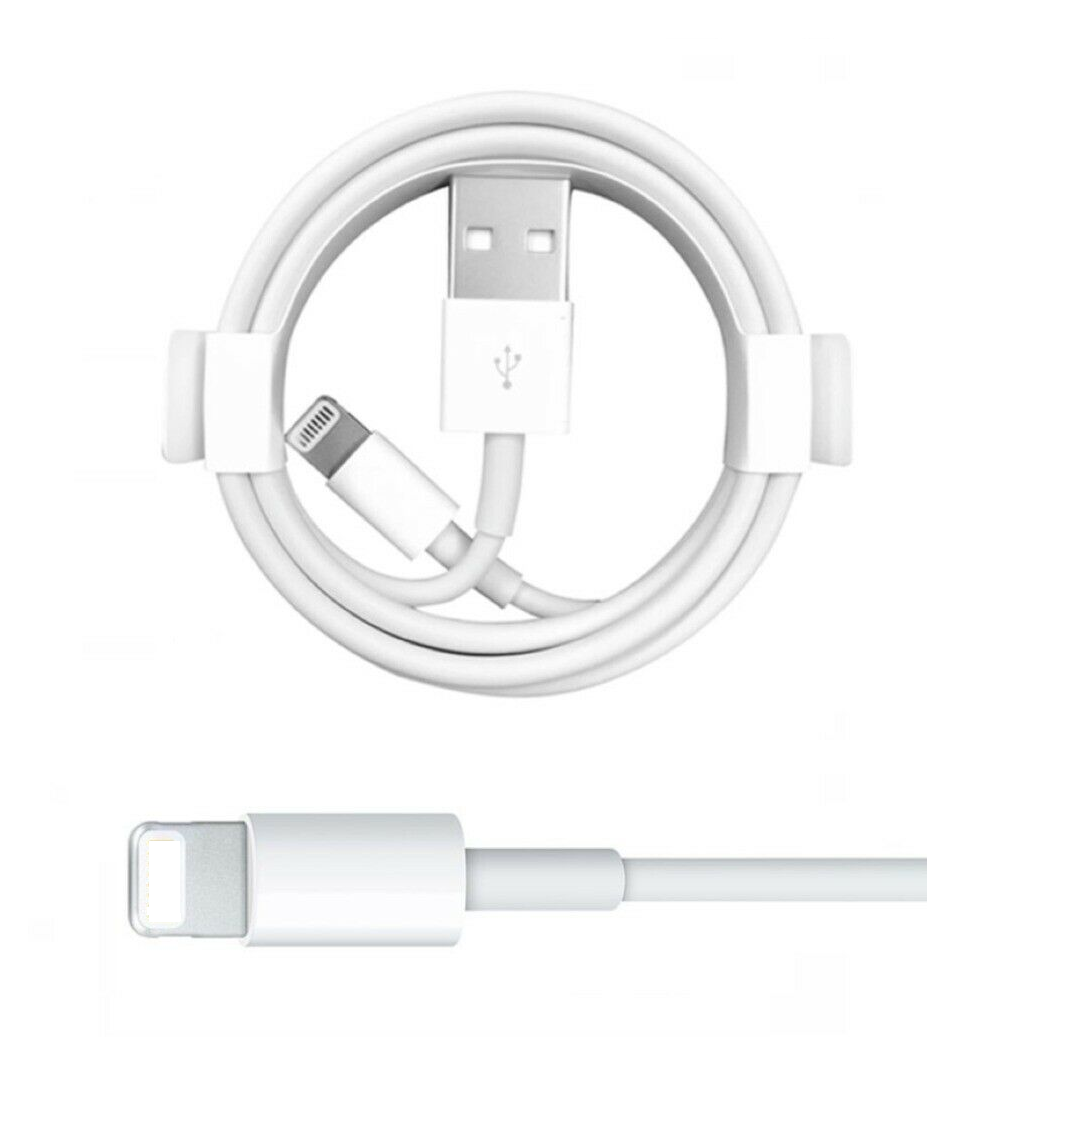 Iphone Cable Reinforced USB Charger for Iphone 5/6/7/8 / X / XS / 1 – Tech Hub